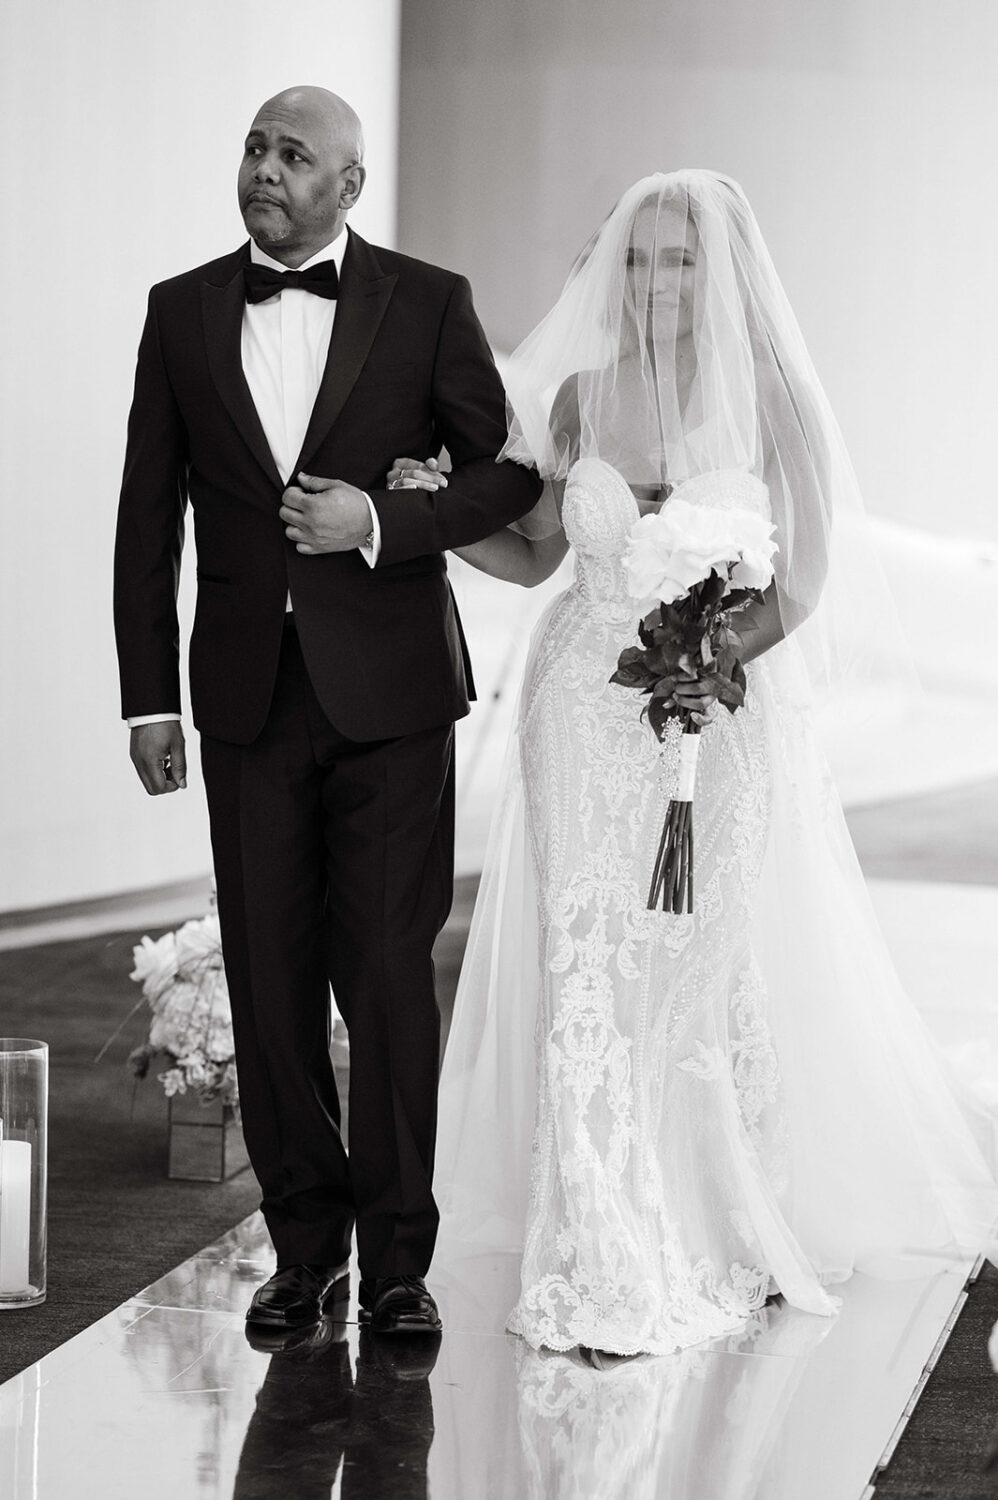 father escorting bride down the aisle black and white bride smiling with bridal veil